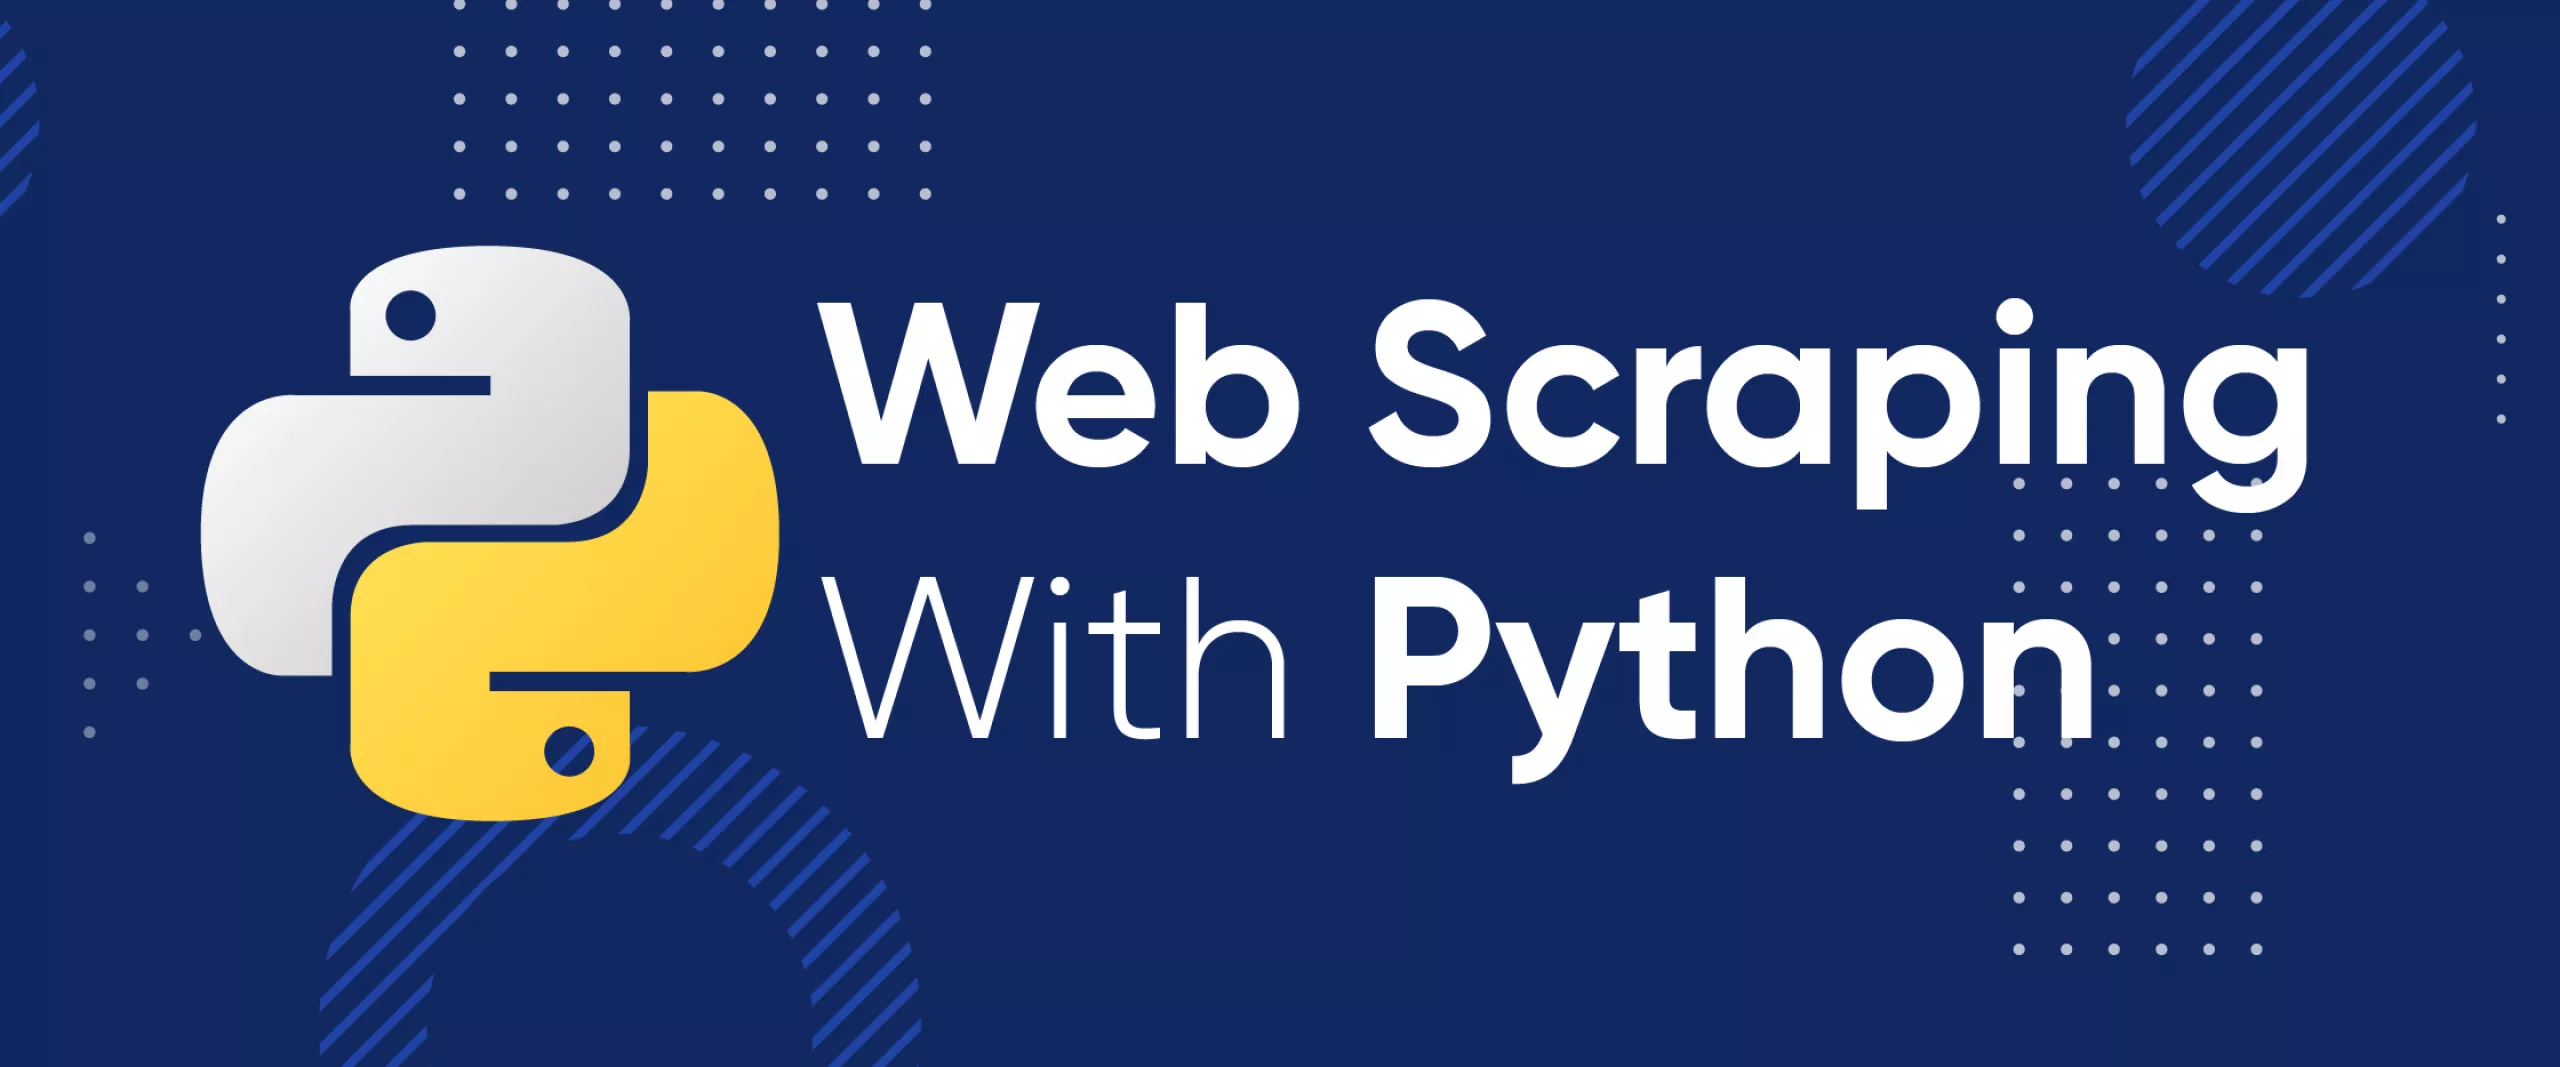 Web Scraping with Python: from Fundamentals to Practice